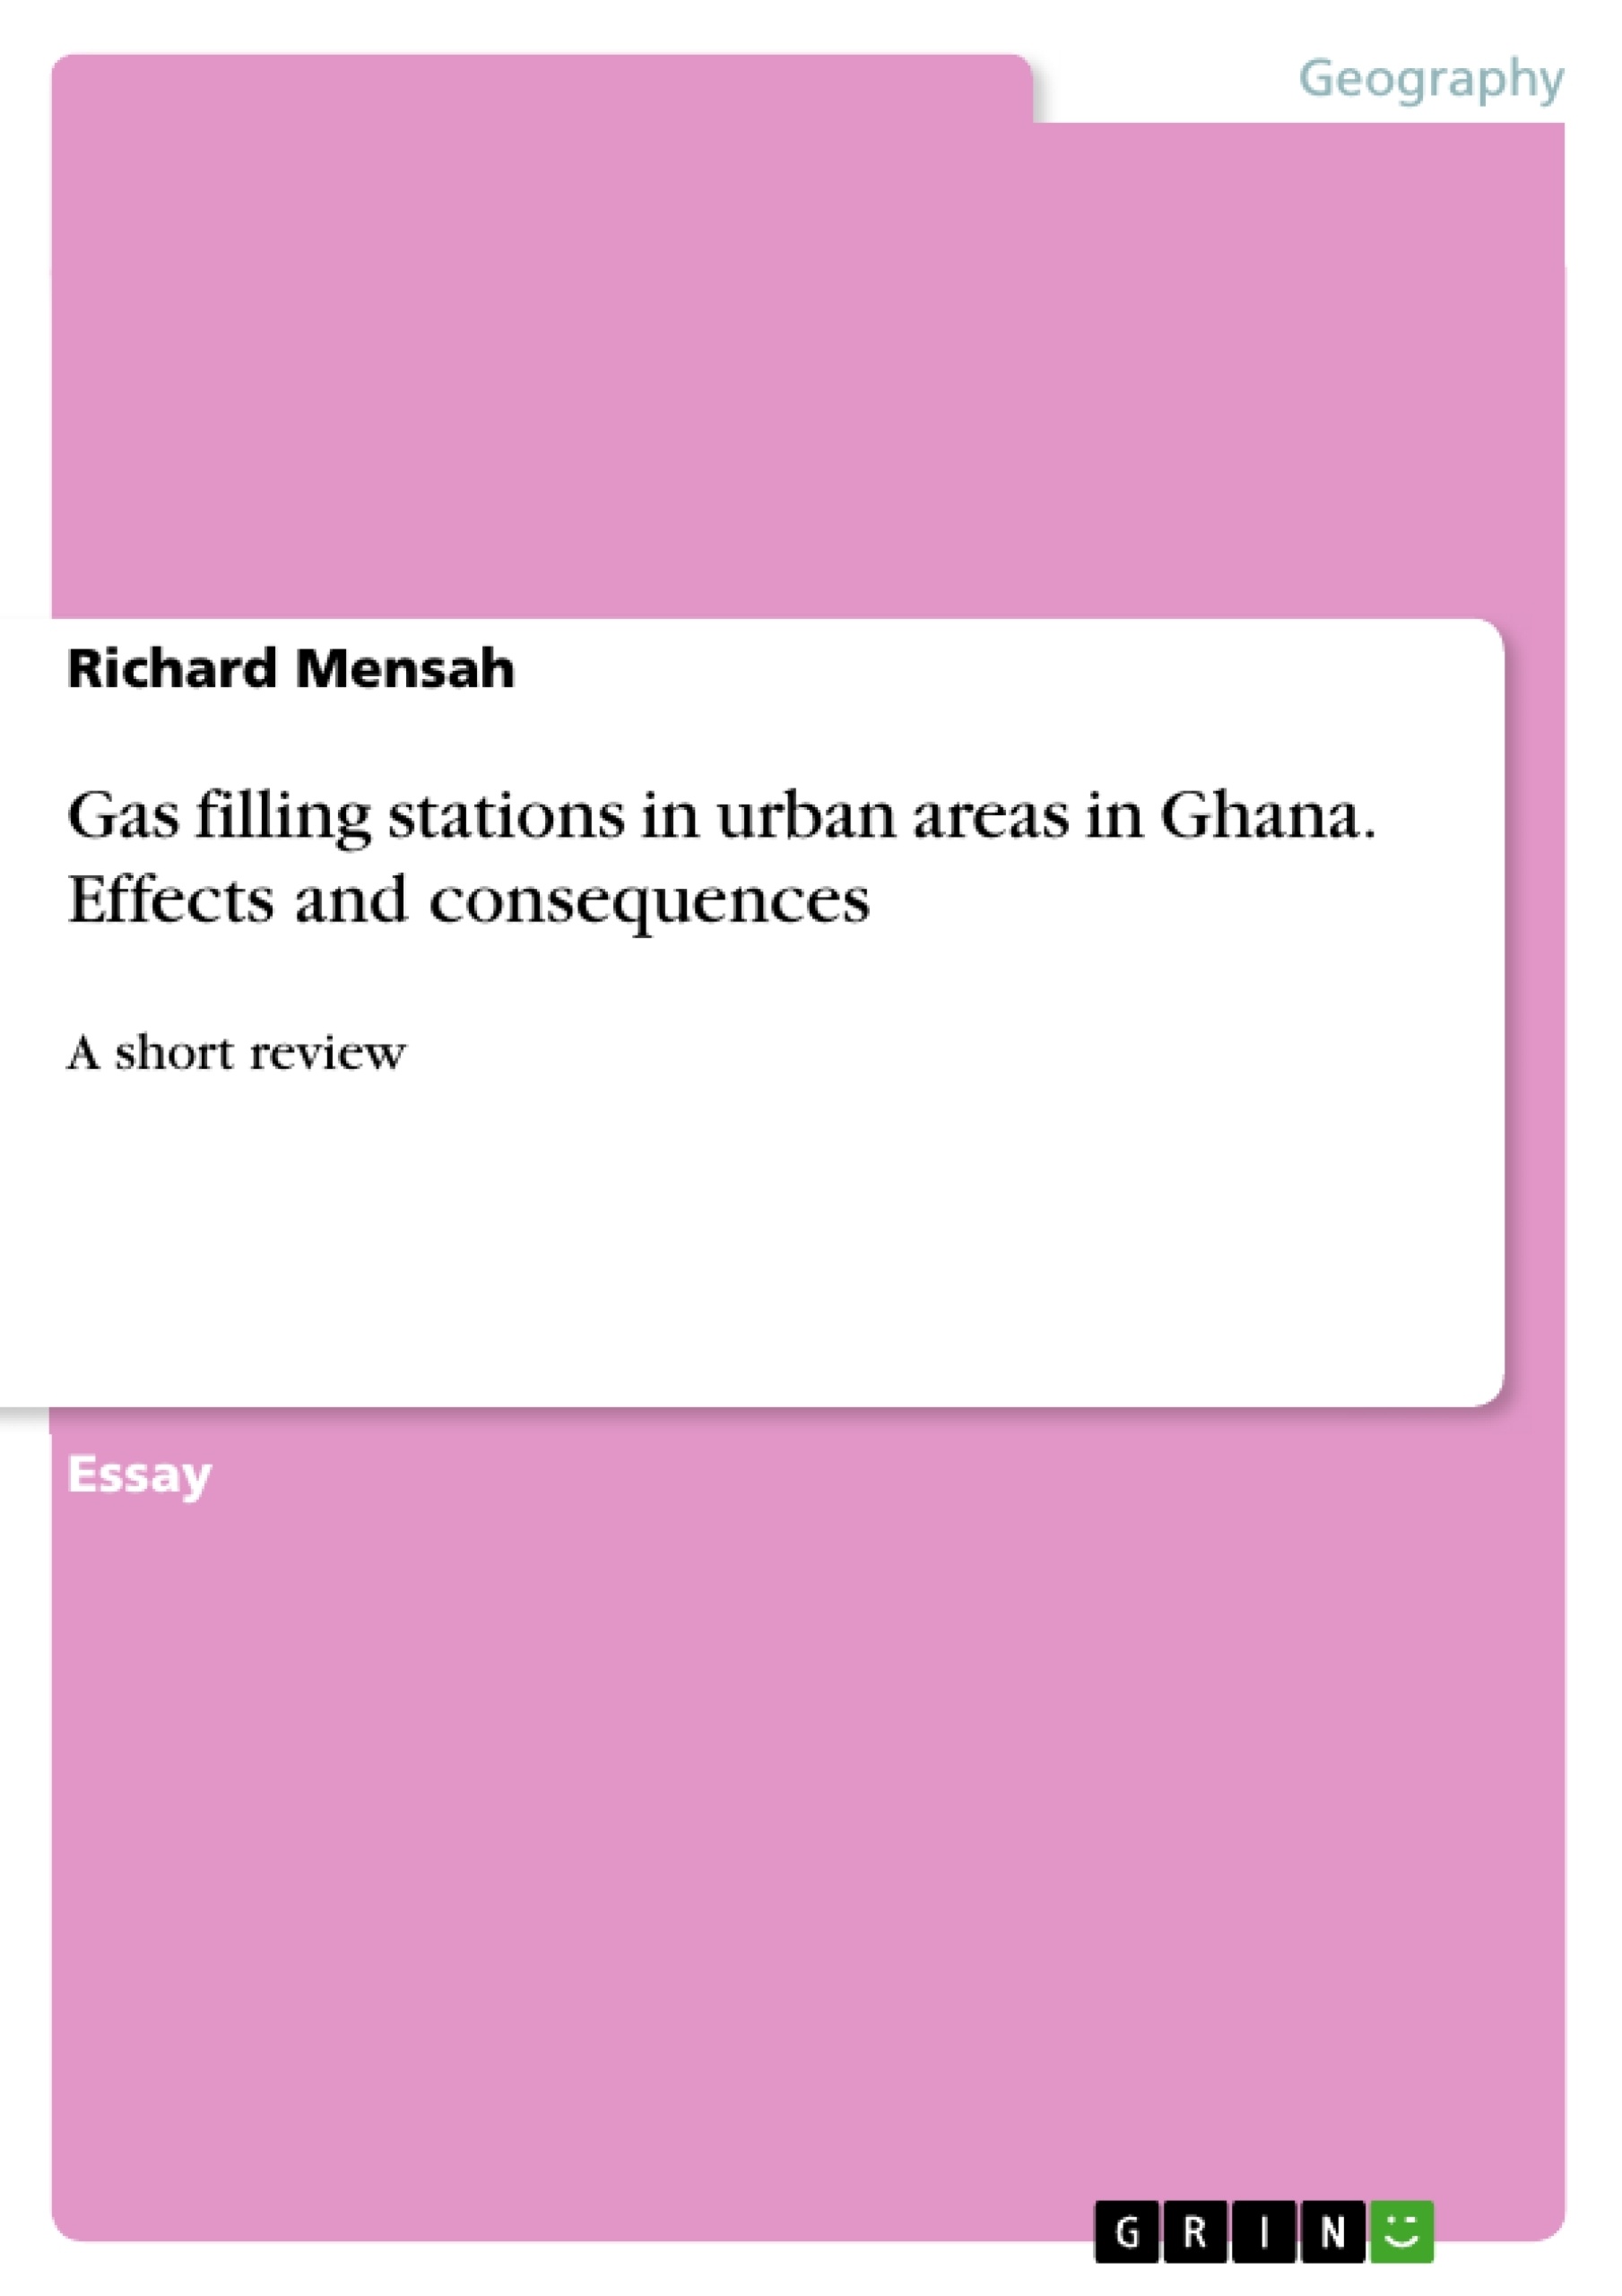 Title: Gas filling stations in urban areas in Ghana. Effects and consequences